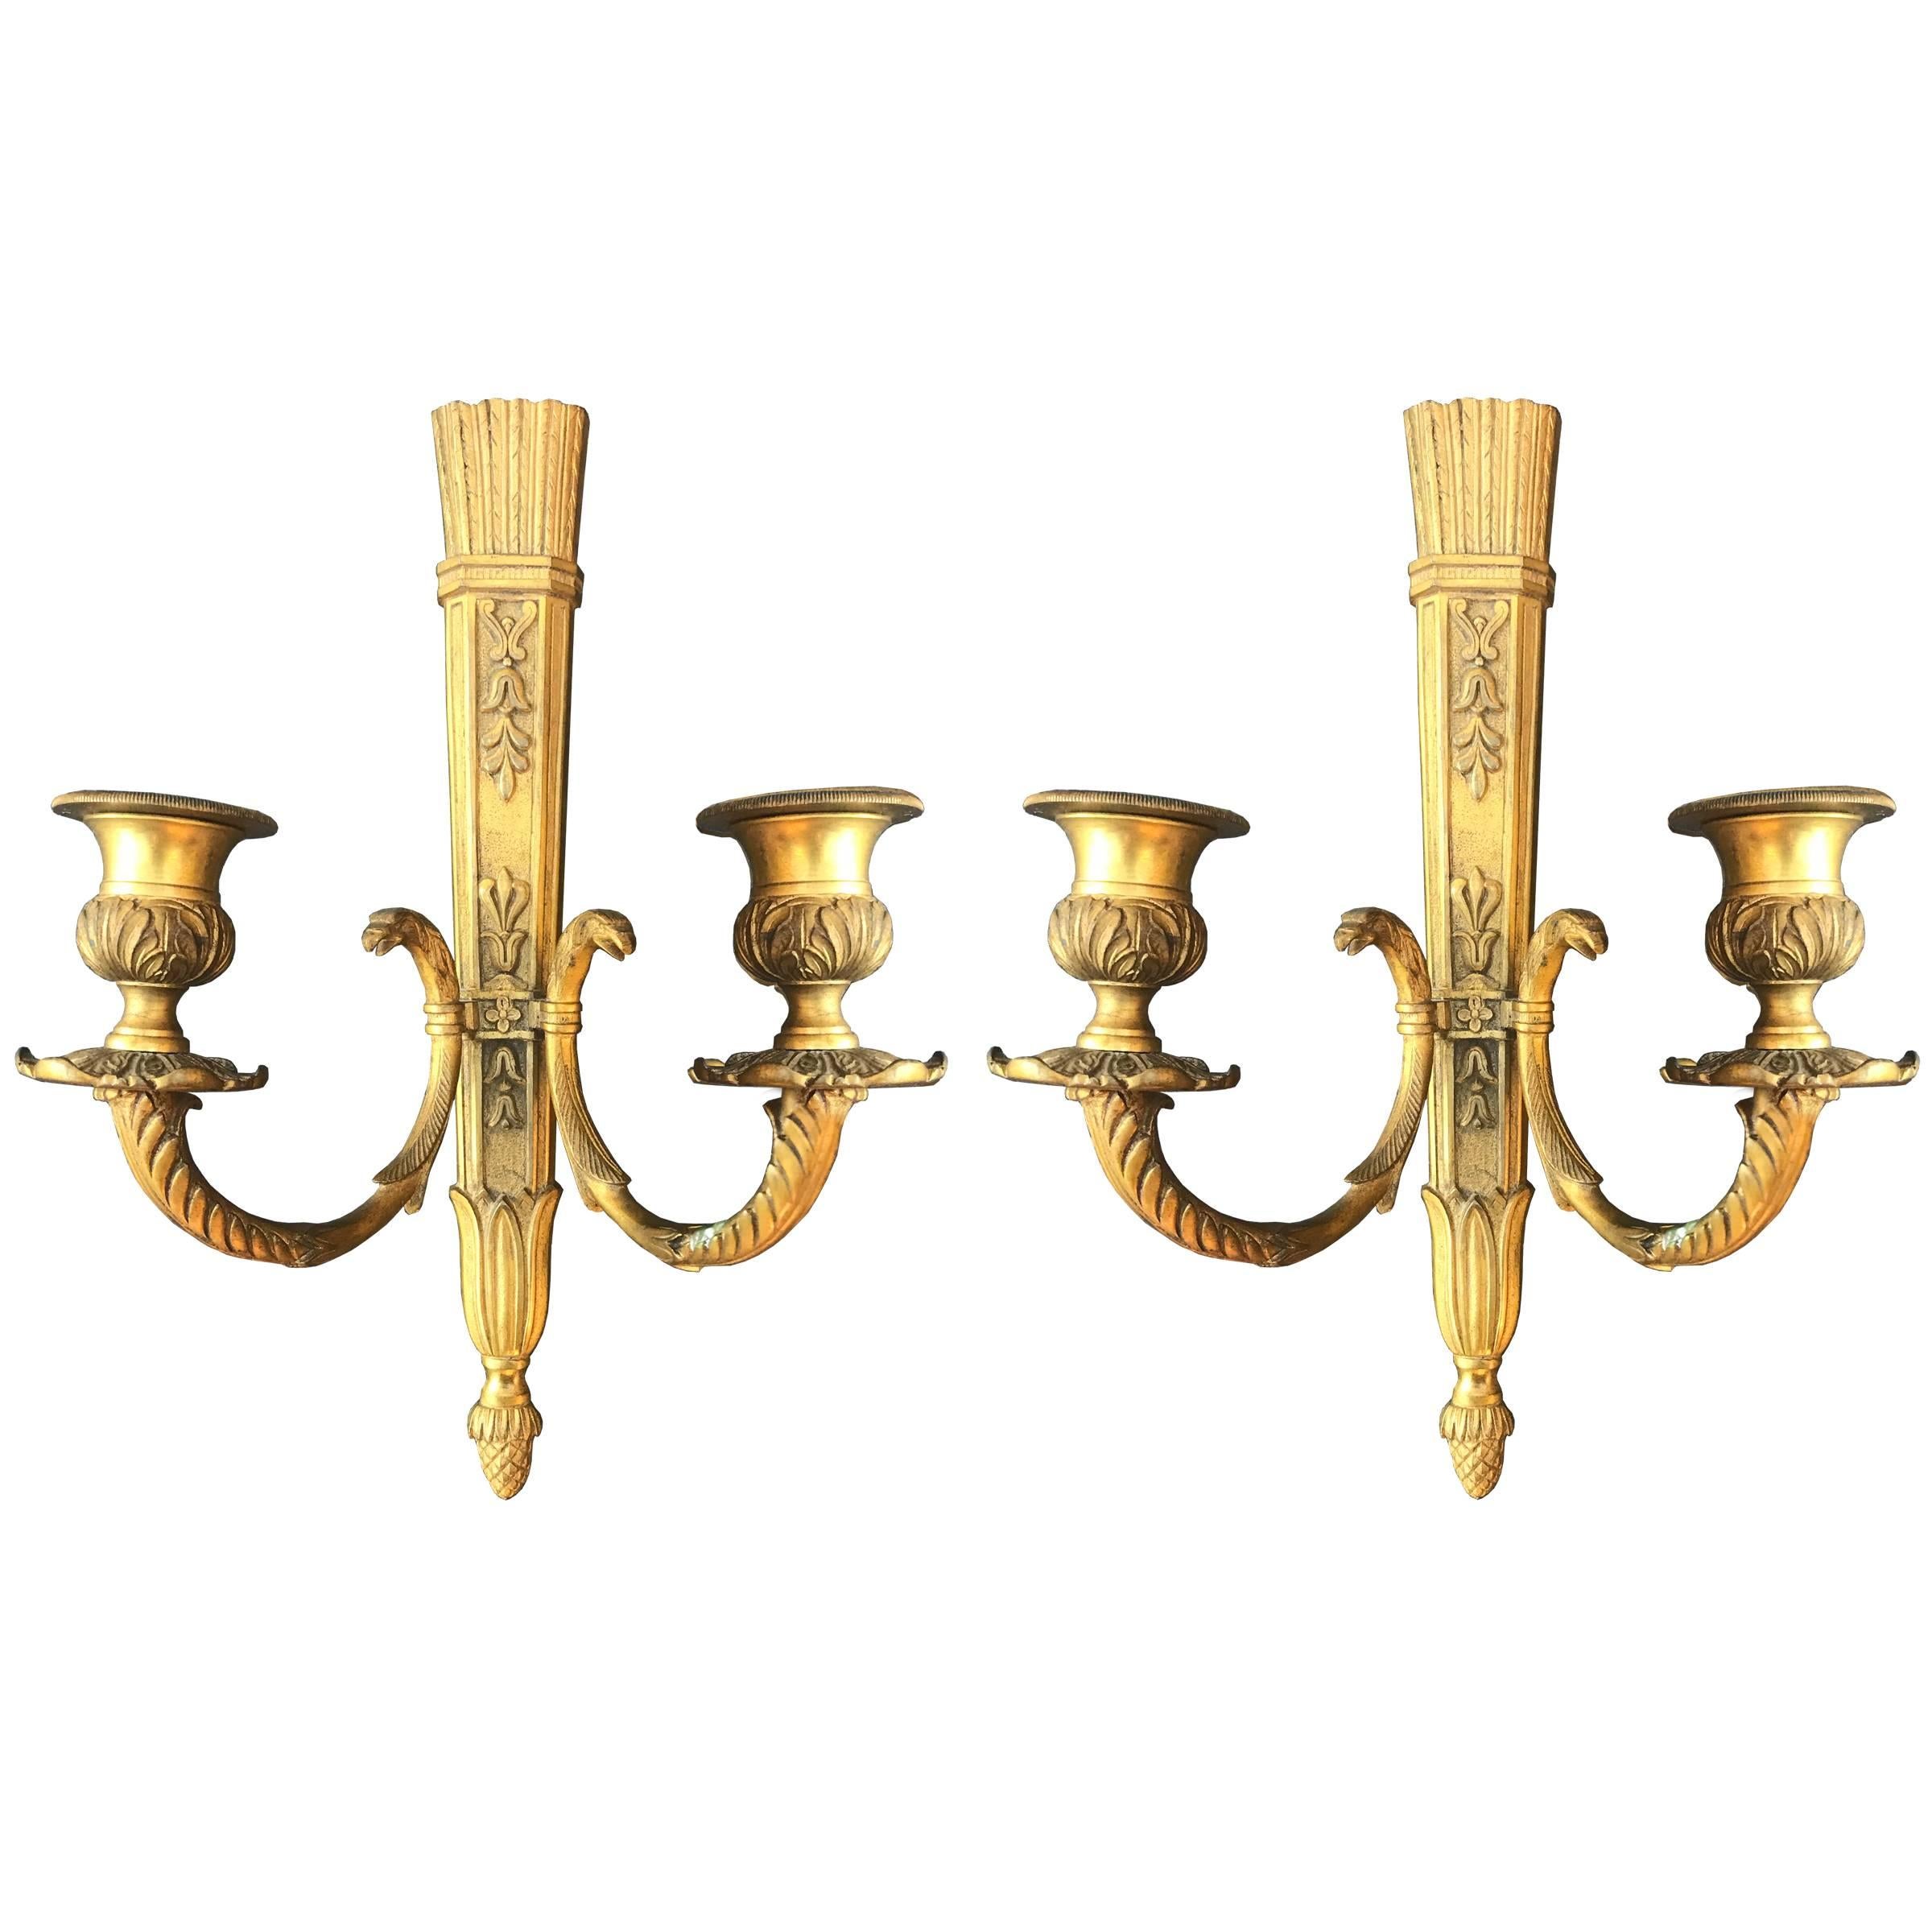 Pair of French Second Empire Candle Sconces